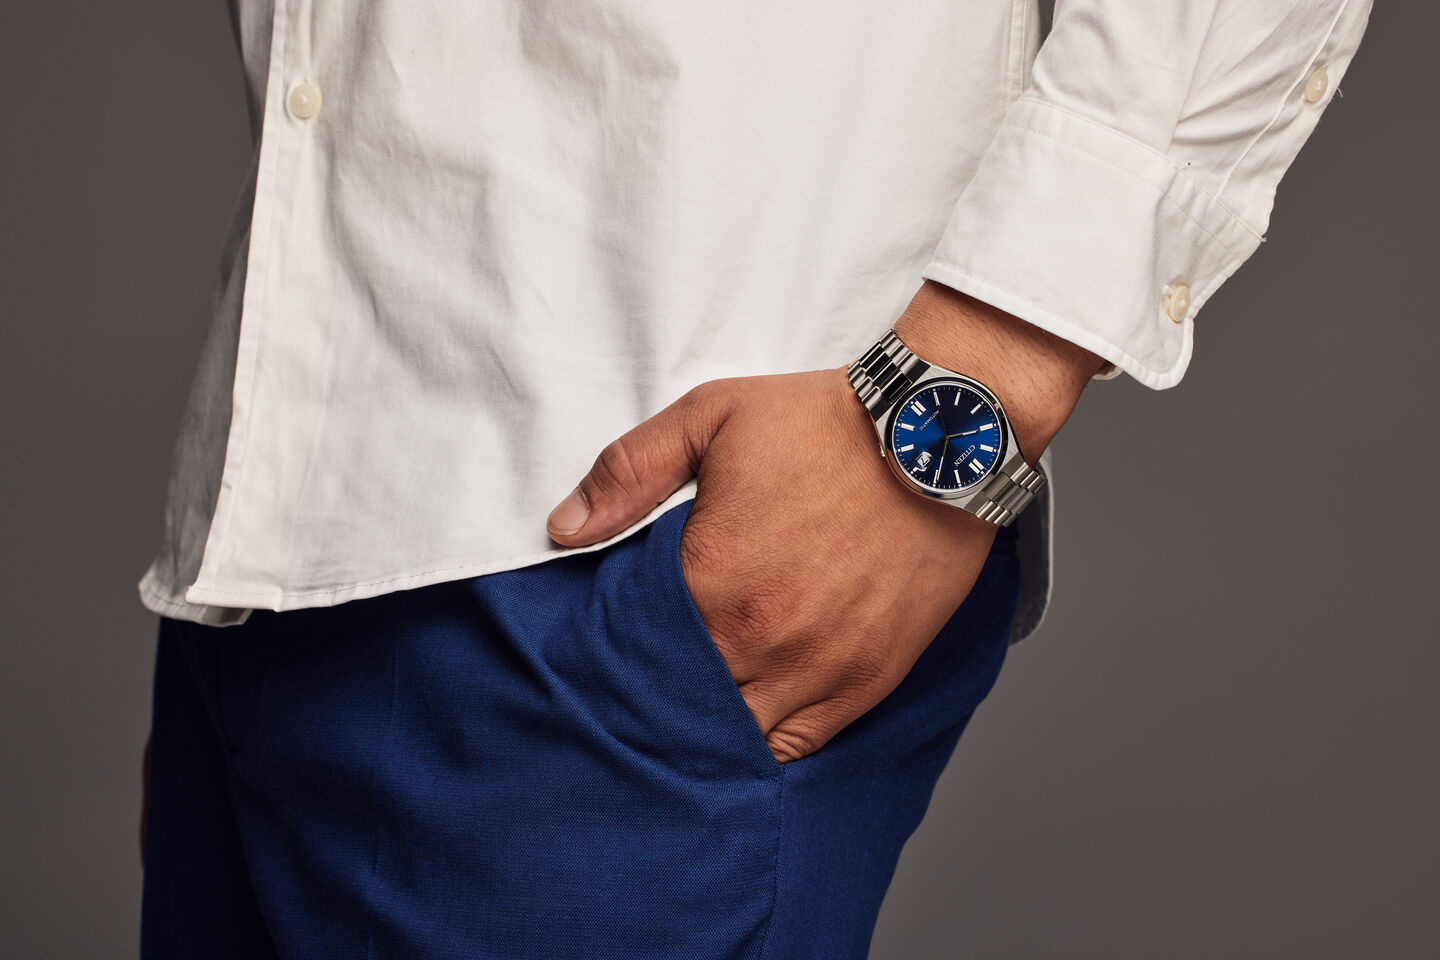 Citizen Tsuyosa Automatic (40mm) Sunray Blue Dial / Stainless